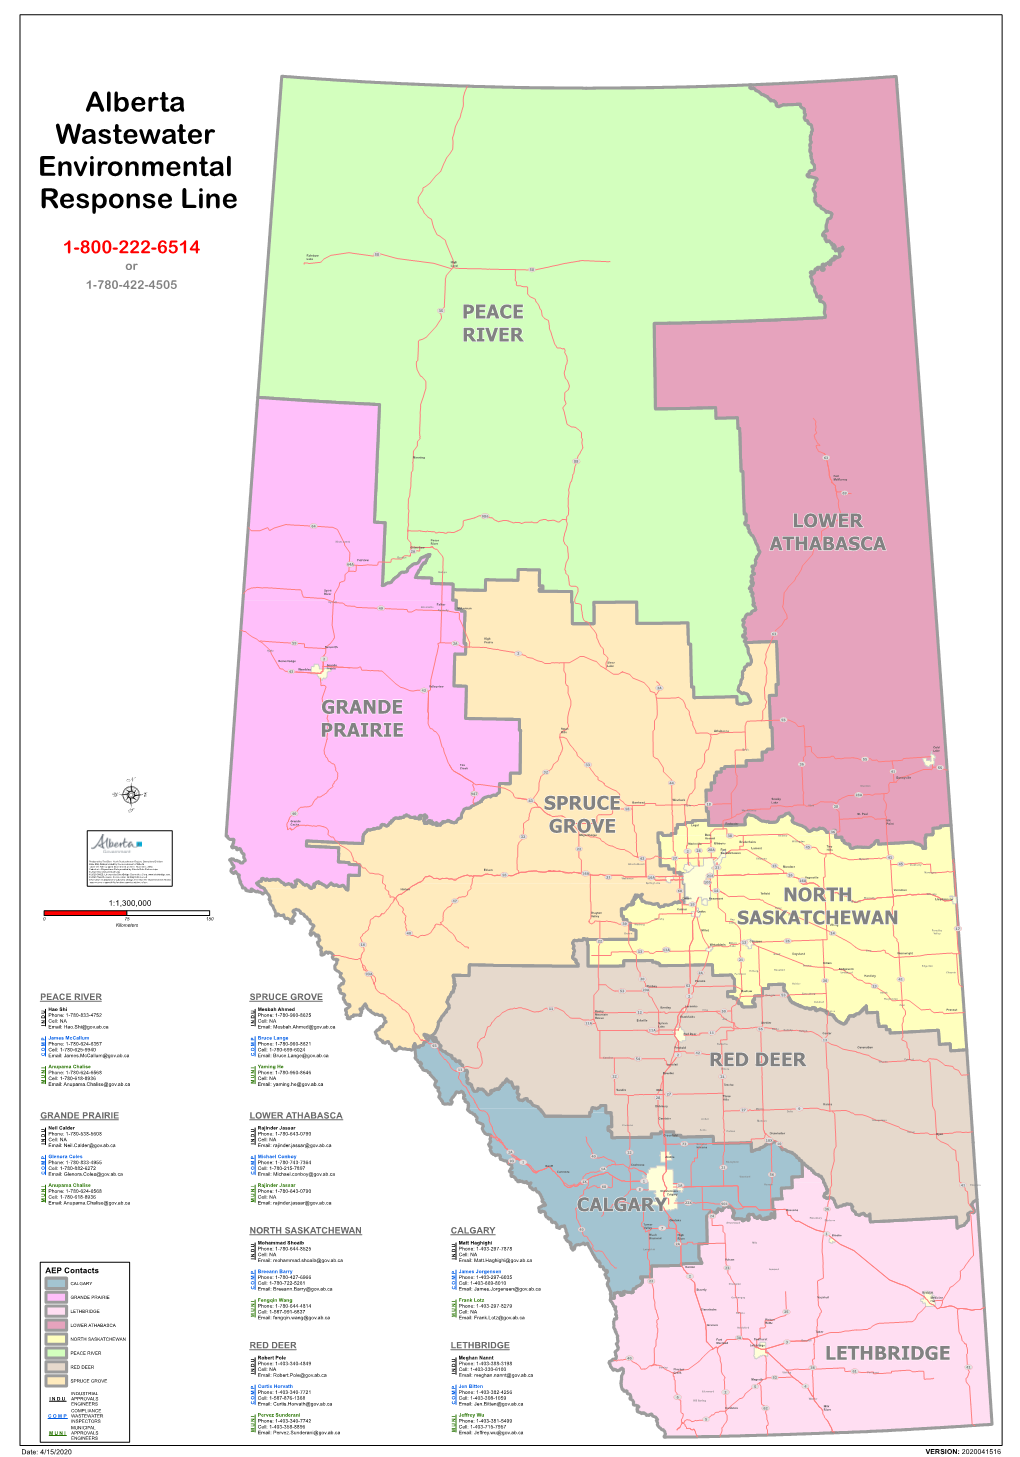 Alberta Wastewater Environmental Response Line [And Contacts by Region]